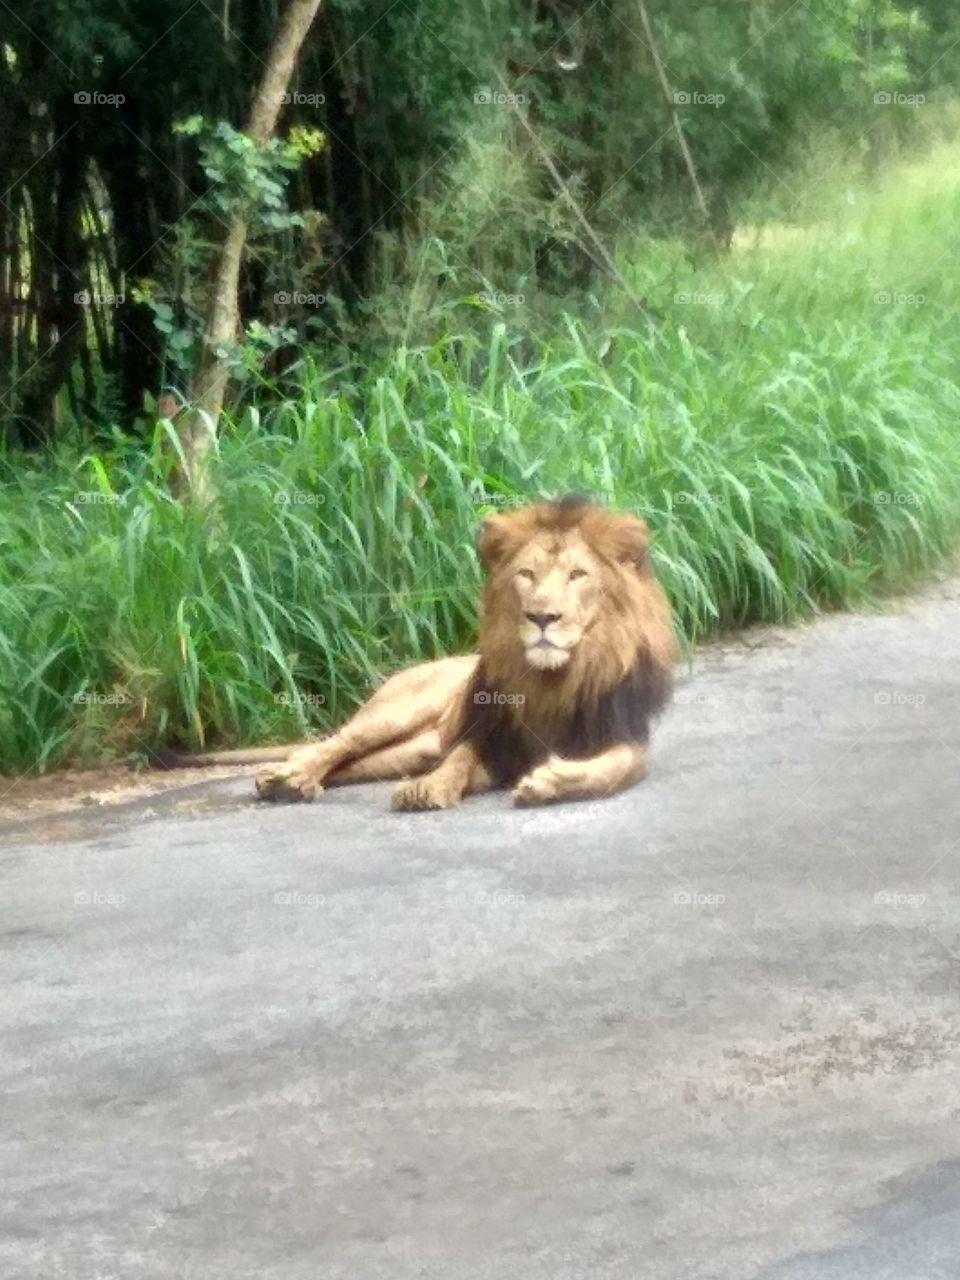 Lion the king of jungle. Resting beside road which is rare in Asia. I took this picture with my phone. I feel really proud myself for this picture.